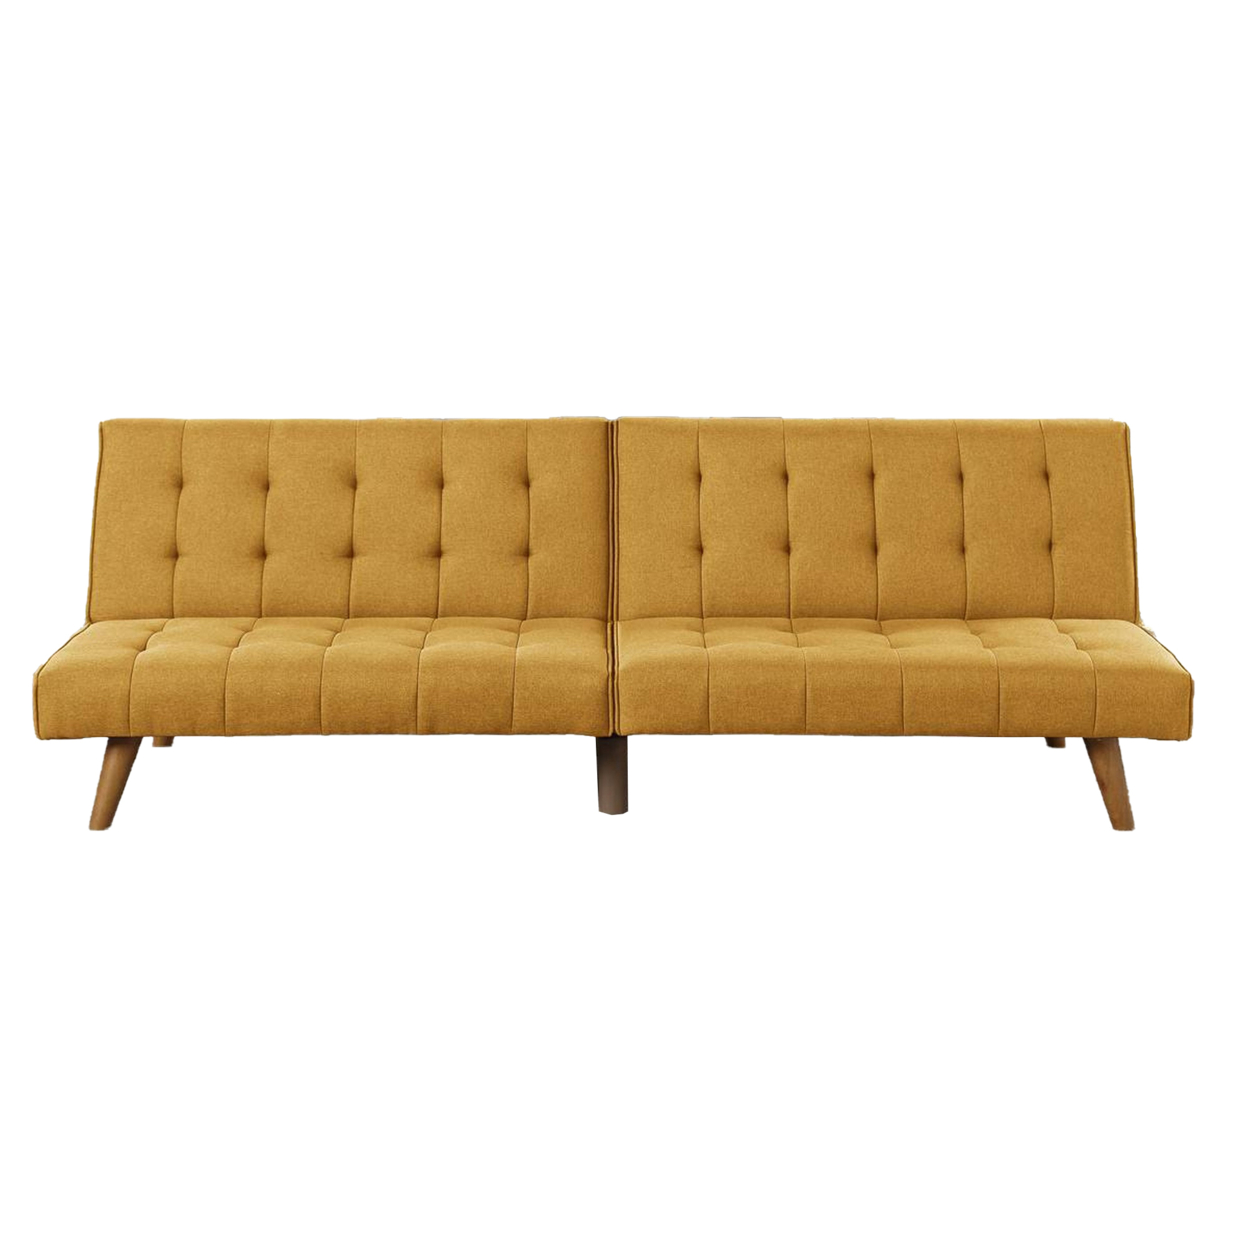 Fabric Adjustable Sofa With Tufted Details And Splayed Legs, Yellow- Saltoro Sherpi